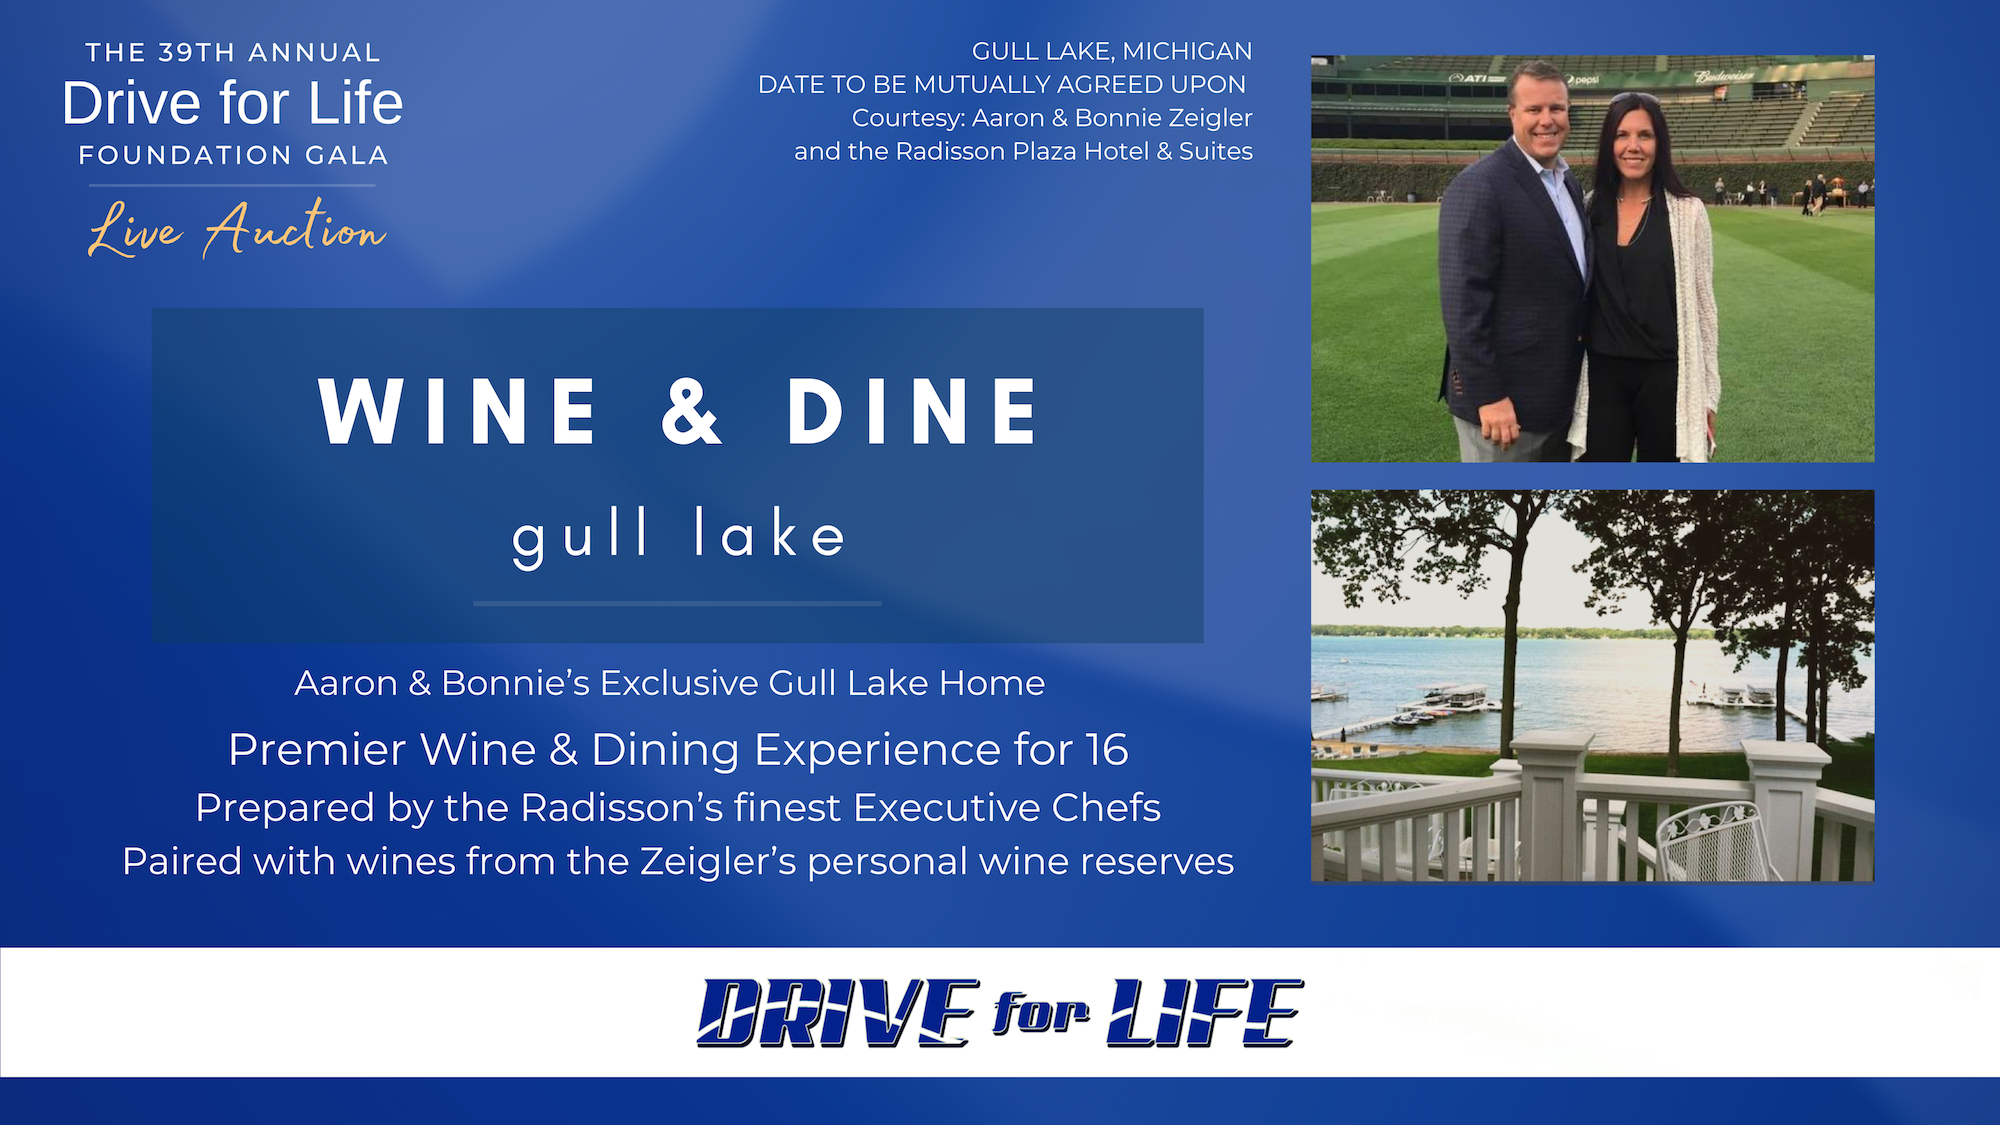 LIVE AUCTION EXPERIENCE: Wine & Dine on Gull Lake - Available at the 39th Annual Drive for Life Foundation Monday, September 13, 2021 at 6:30 p.m. at the Radisson Plaza Hotel in Kalamazoo, Mich.